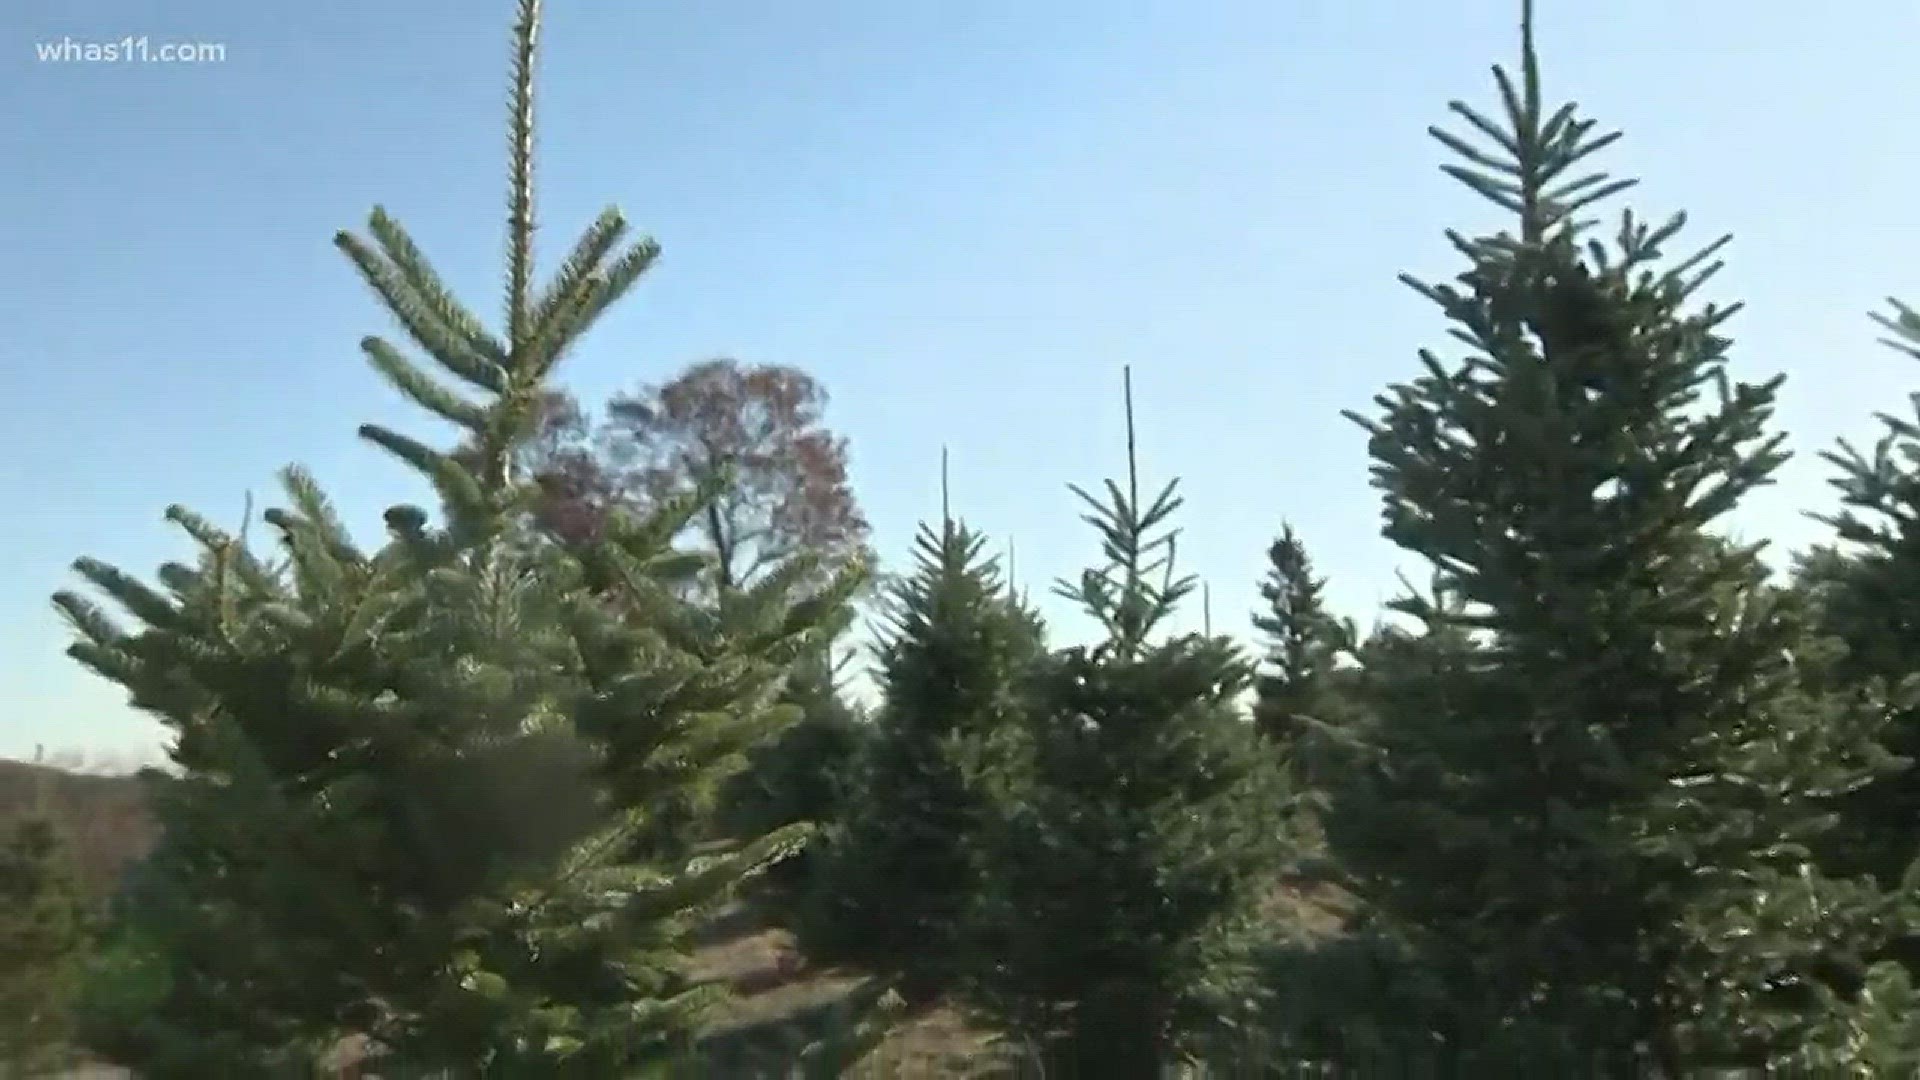 The recession of 2007 could affect Christmas tree availability this year